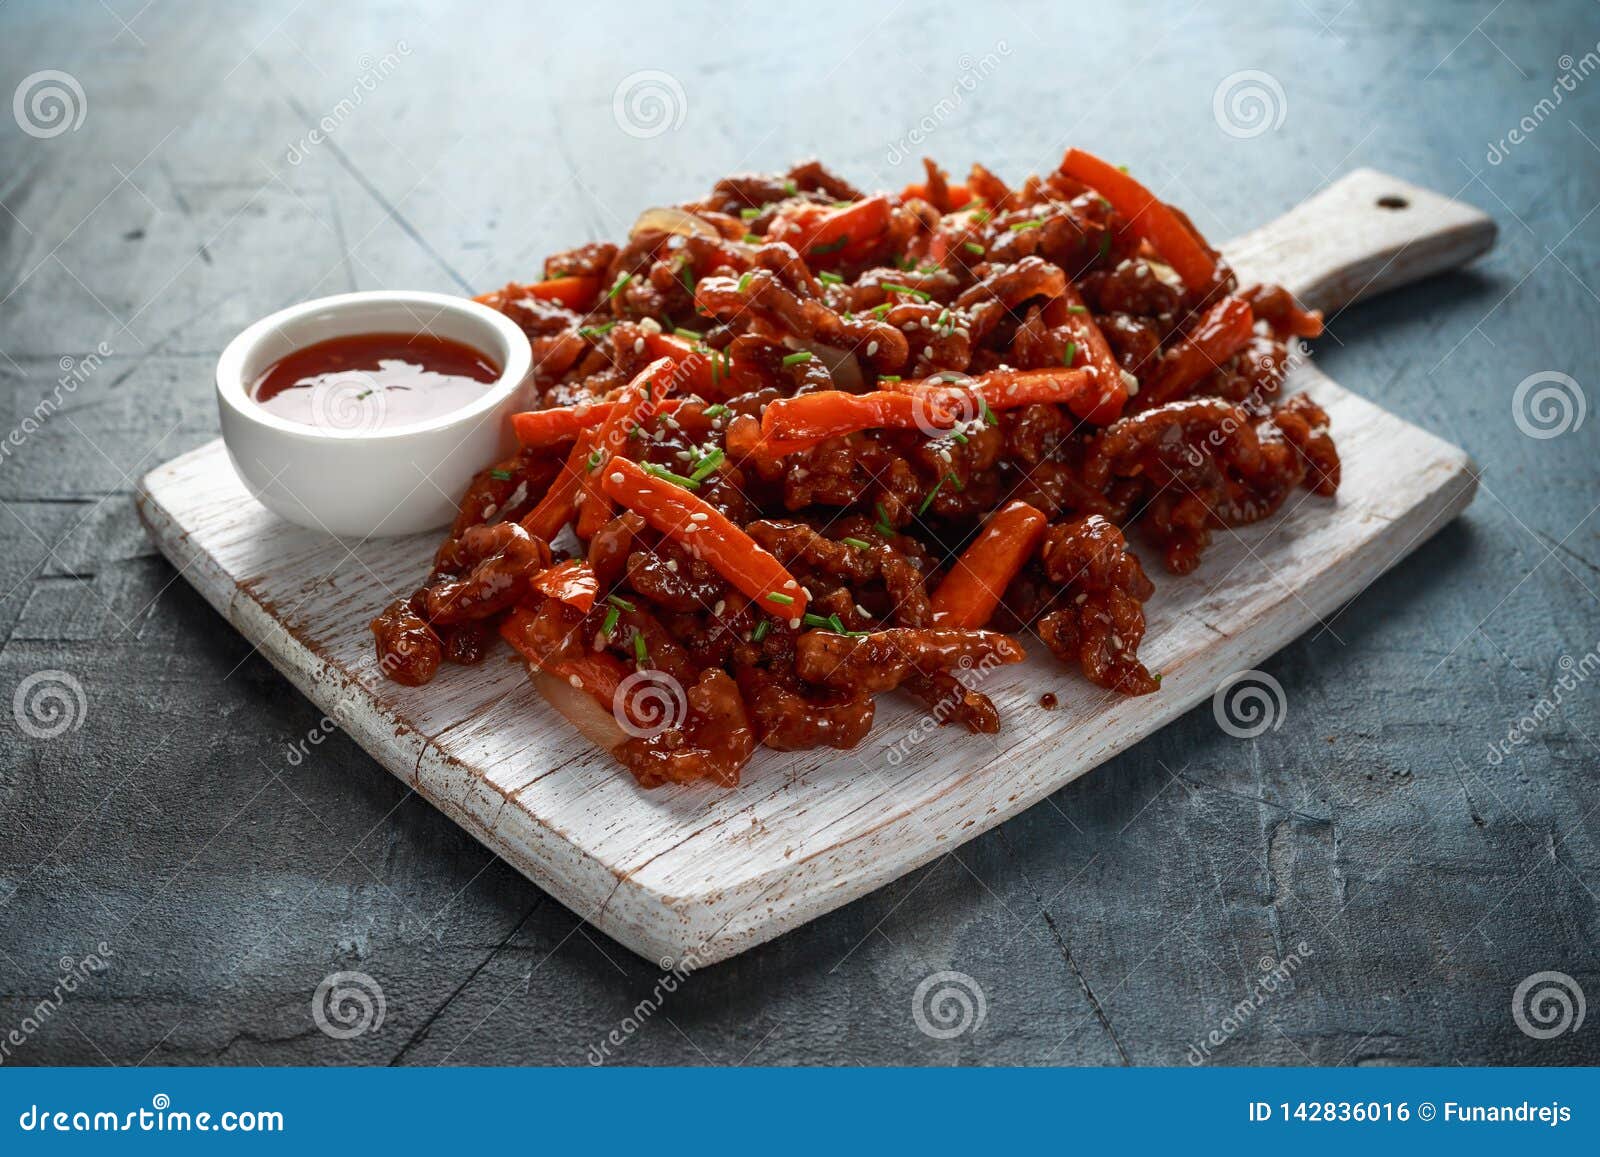 Crispy Shredded Beef With Carrots And Sweet Chilli Sauce On White Wooden Board Chinese Takeaway Food Stock Photo Image Of Lunch Brown 142836016